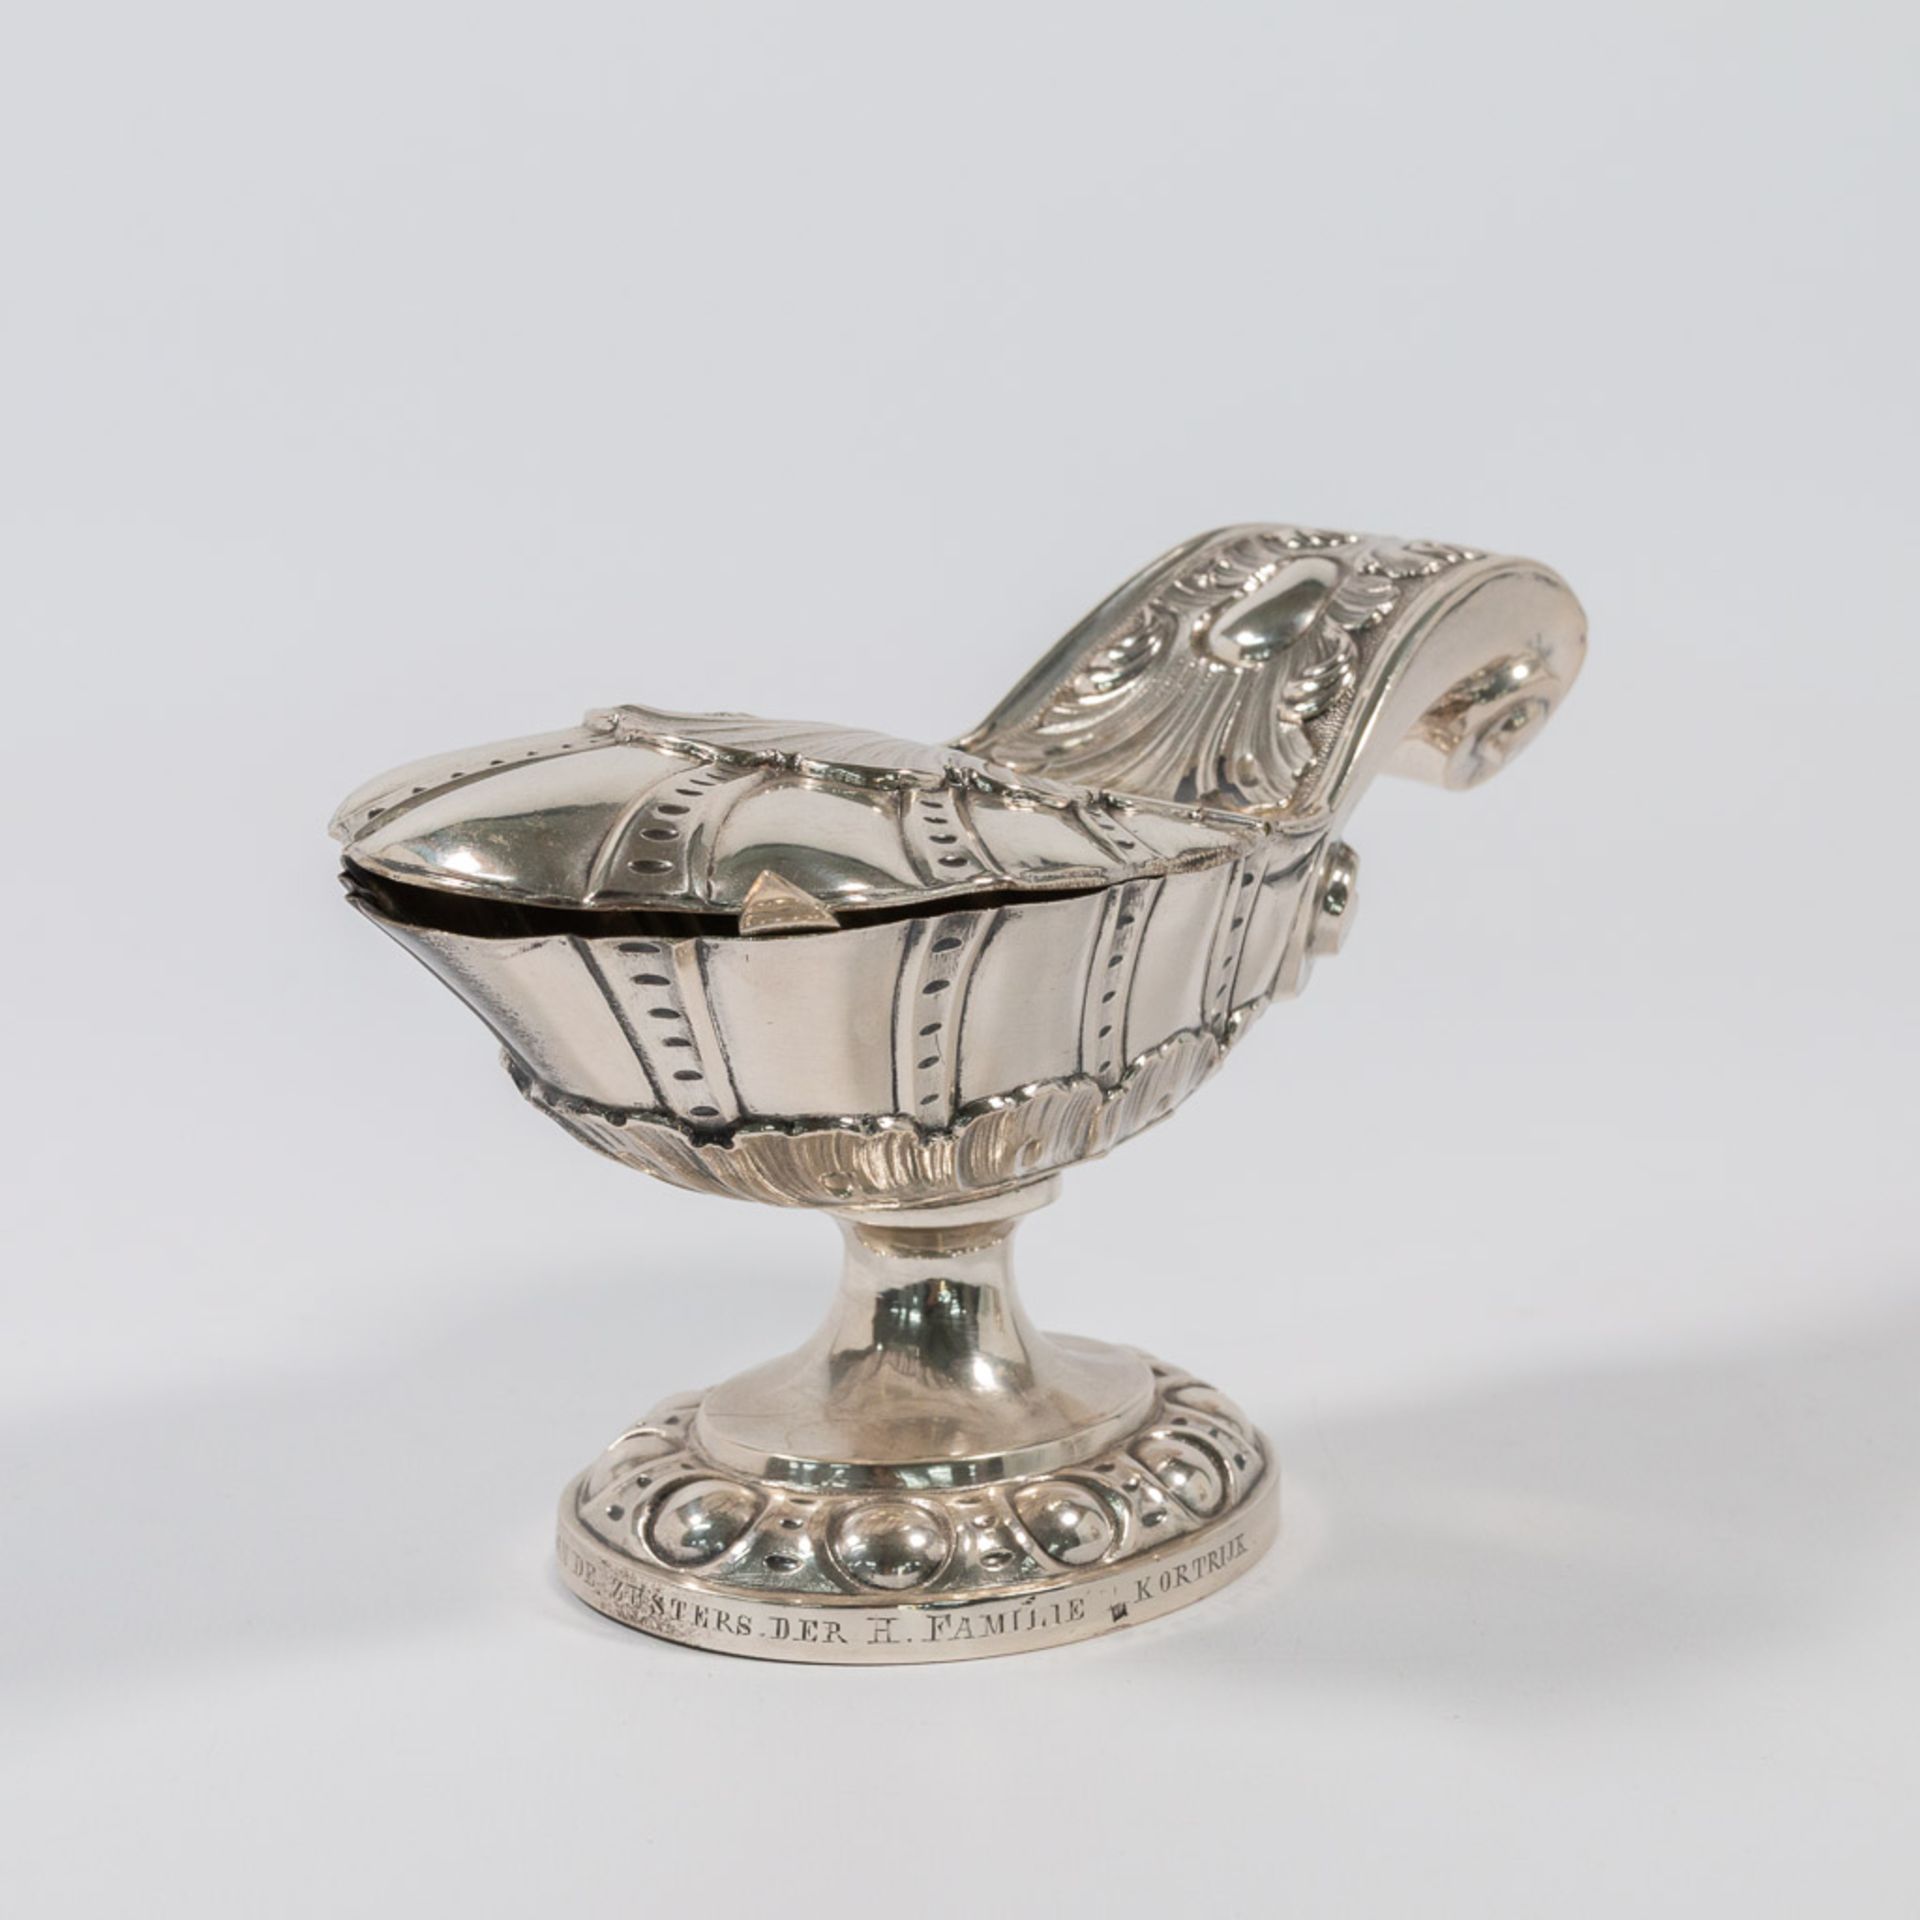 A silver Insence burner and Insence jar. - Image 7 of 39